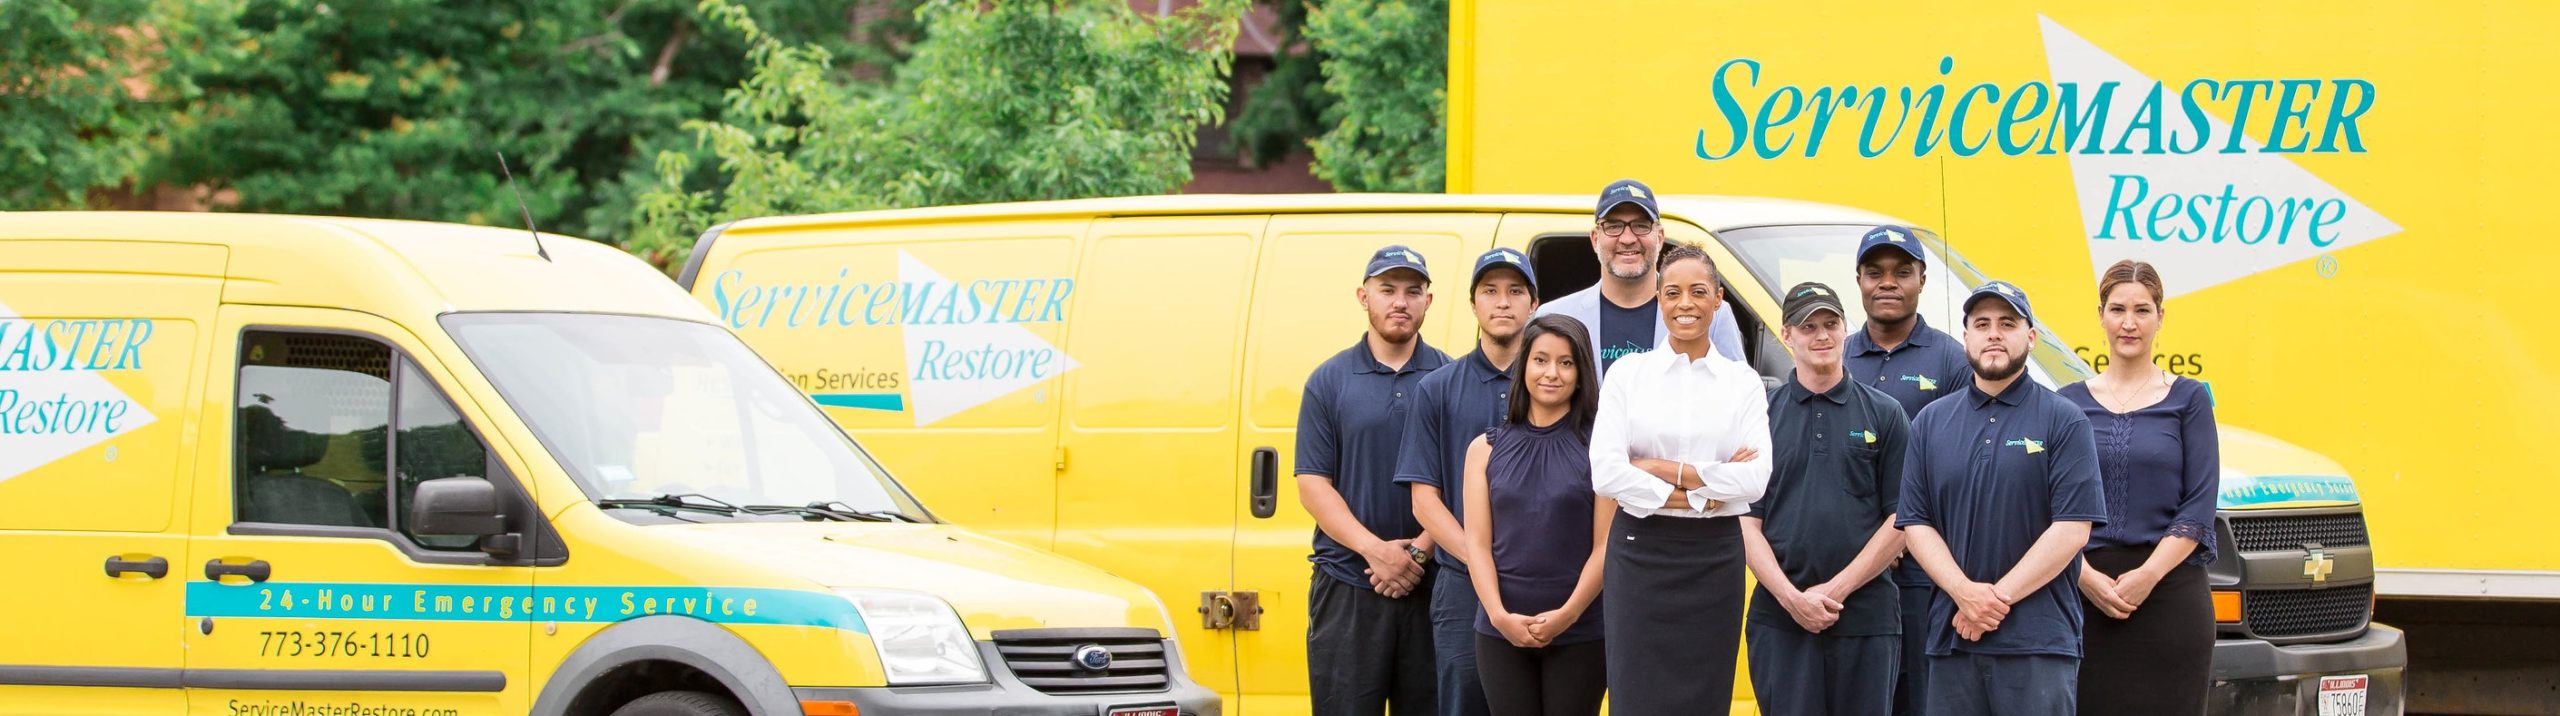 About ServiceMaster Restoration By Simons-Water Damage Restoration-Fire Damage Restoration-Smoke Odor Removal-Chicago-Suburbs-Illinois